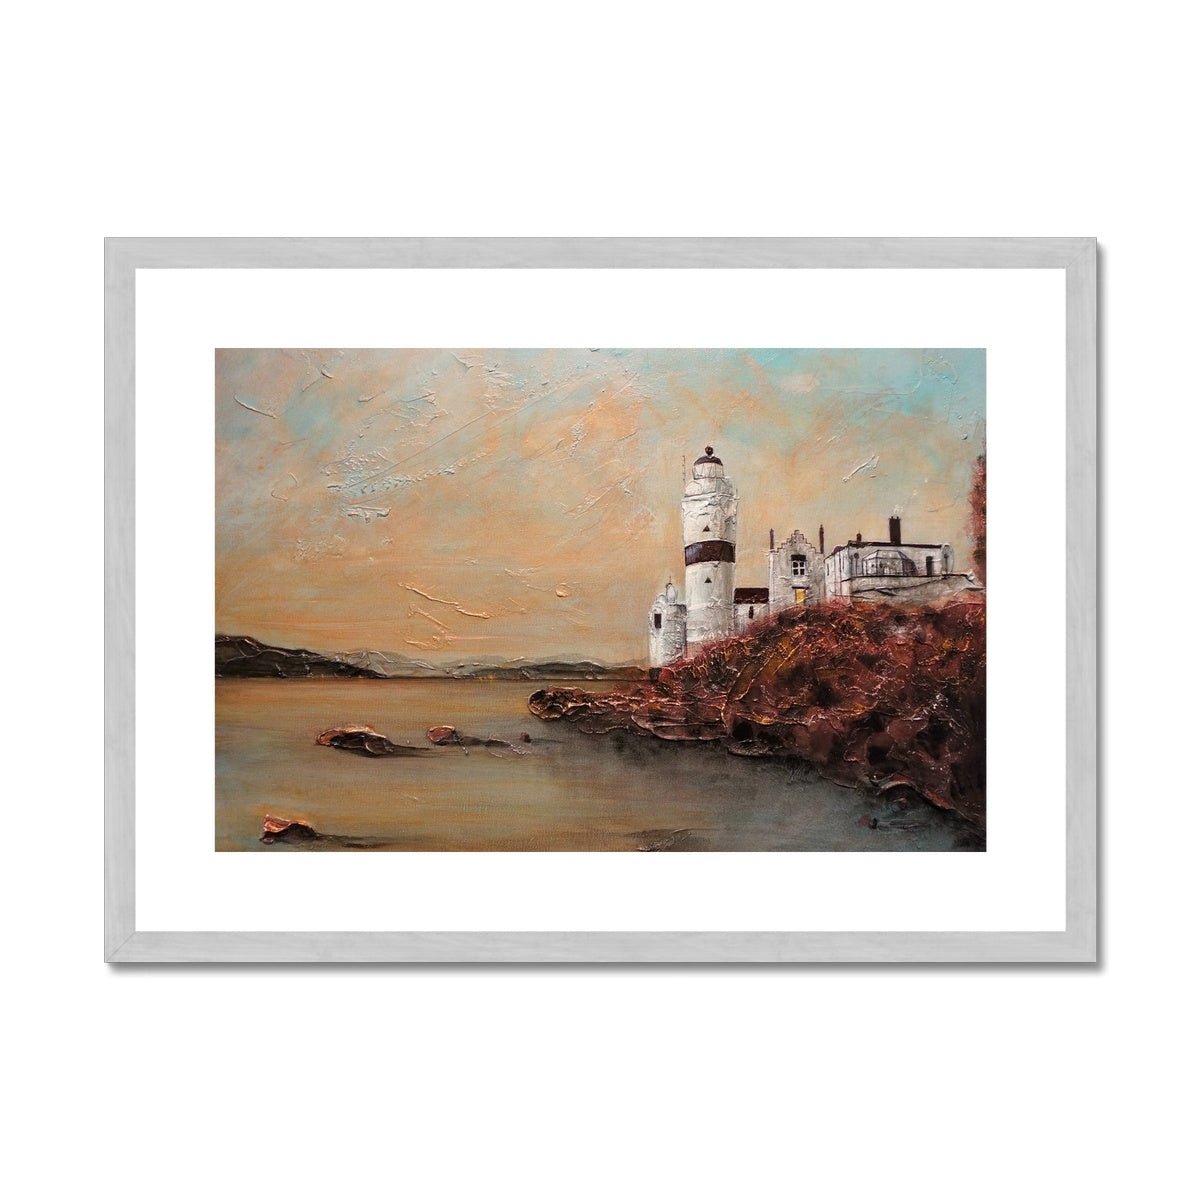 Cloch Lighthouse Dawn Painting | Antique Framed & Mounted Prints From Scotland-Antique Framed & Mounted Prints-River Clyde Art Gallery-A2 Landscape-Silver Frame-Paintings, Prints, Homeware, Art Gifts From Scotland By Scottish Artist Kevin Hunter